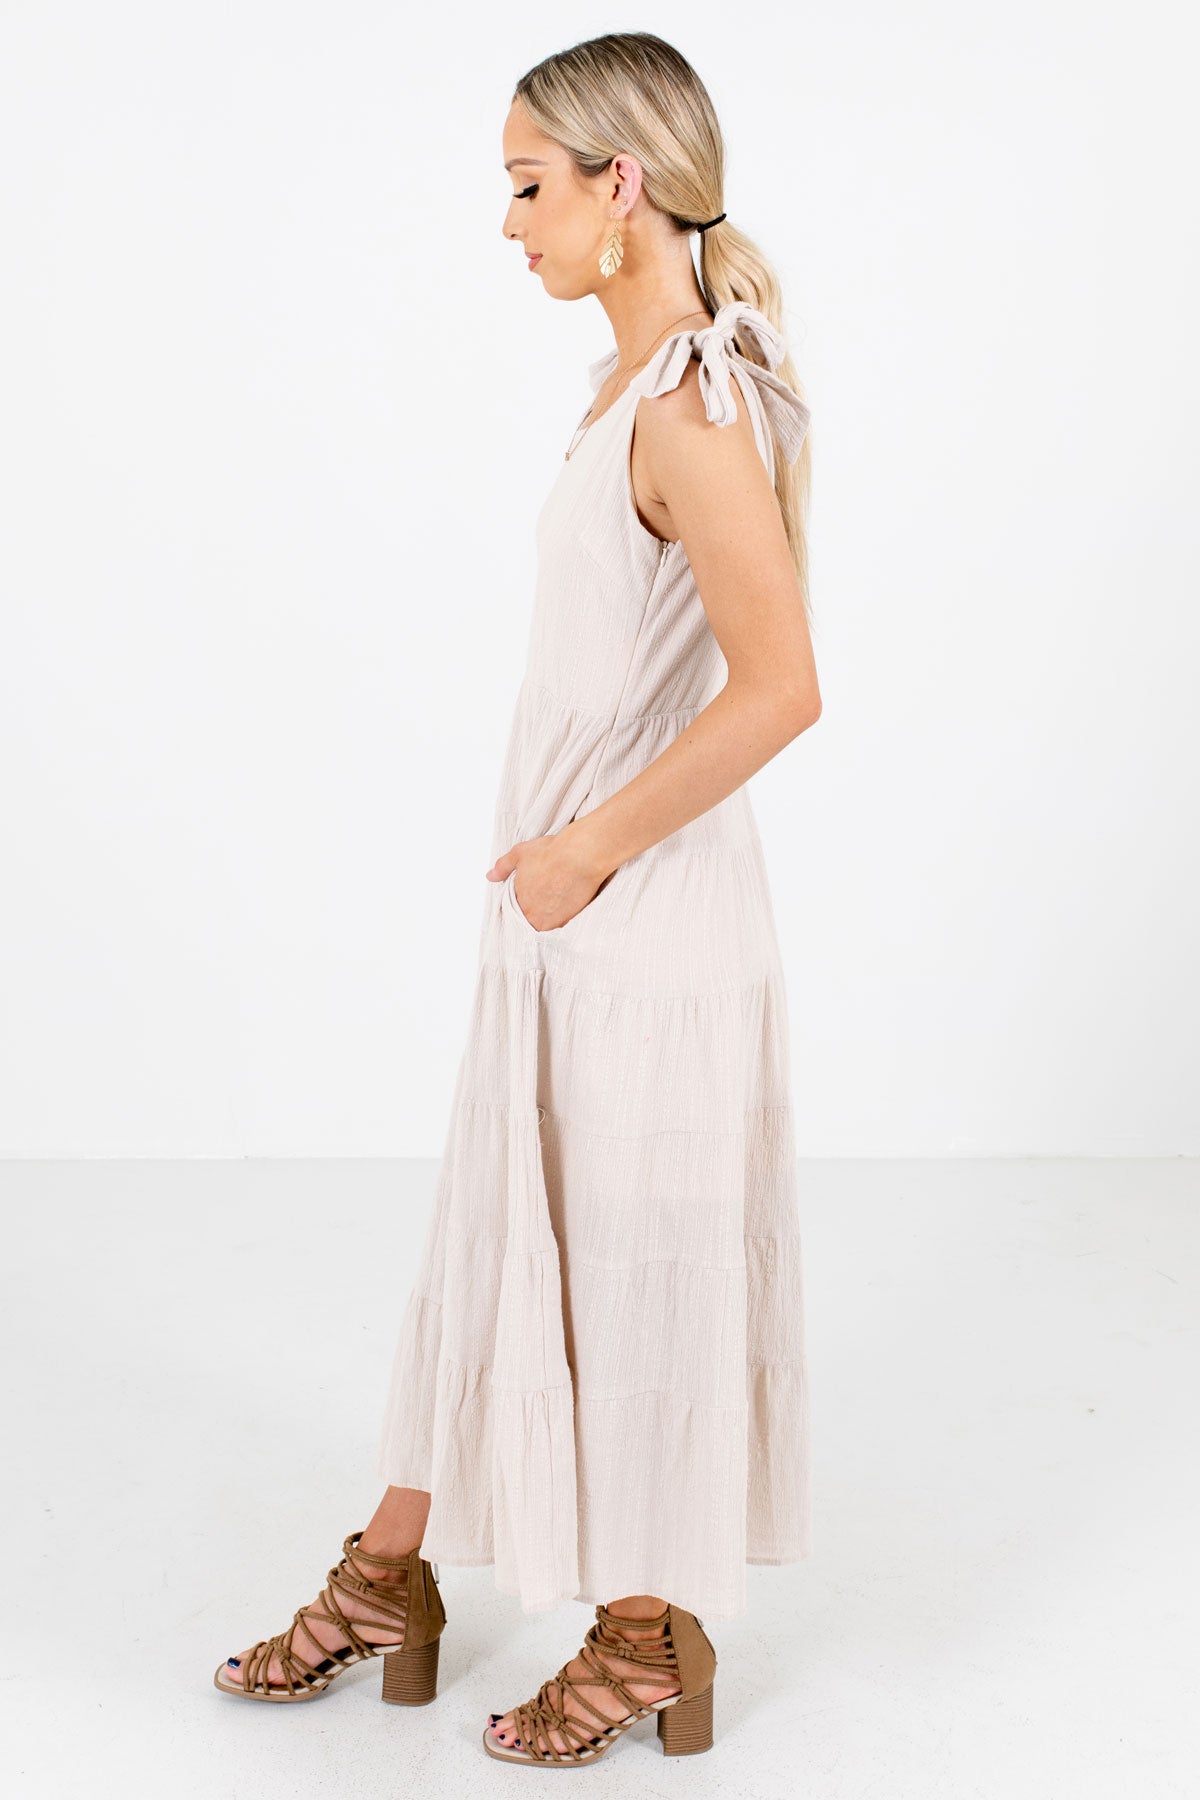 Beige Boutique Midi Dresses with Pockets for Women